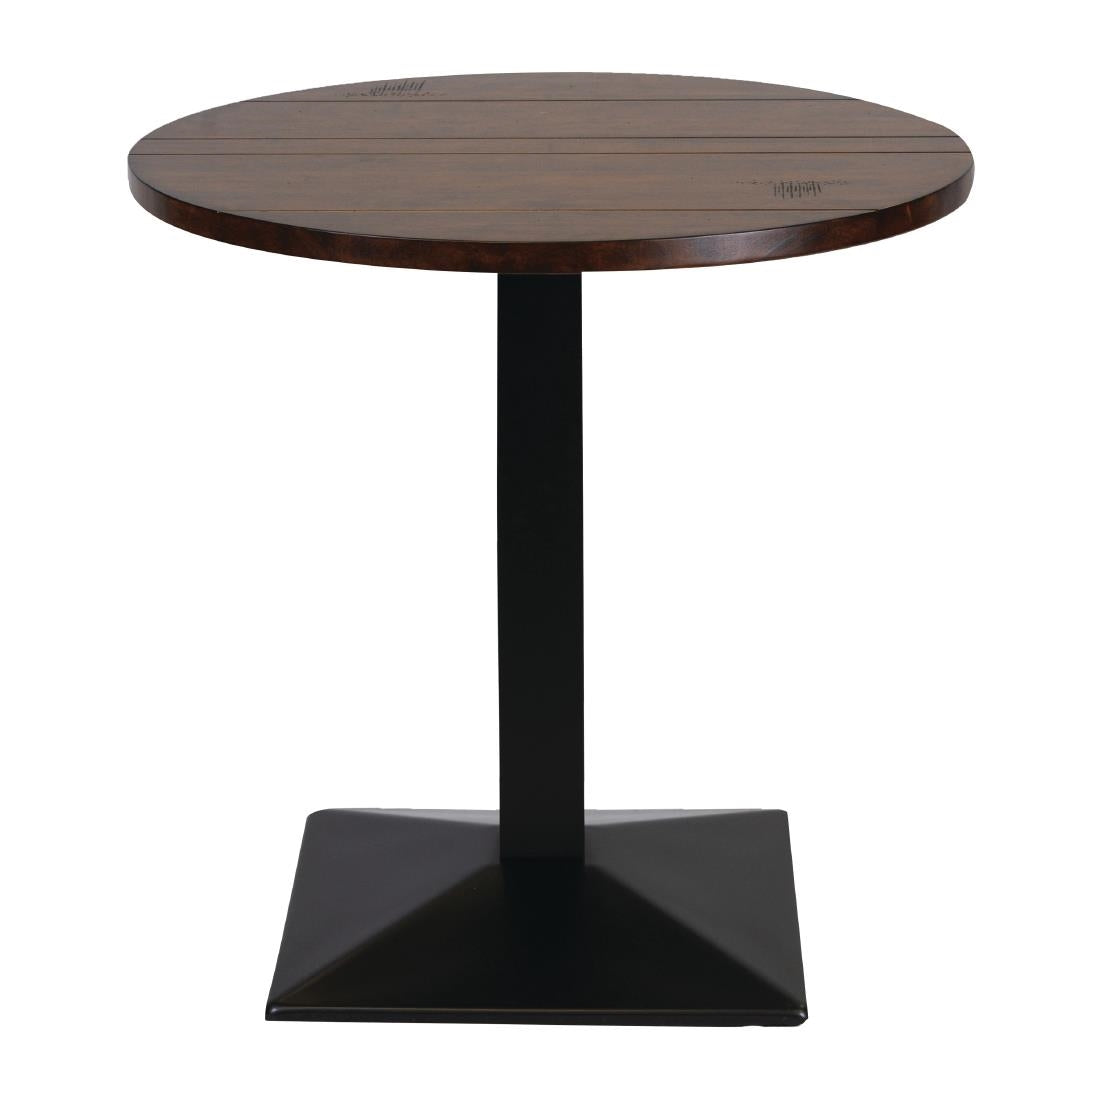 FT511 Turin Metal Base Pedestal Round Table with Vintage Top 760mm JD Catering Equipment Solutions Ltd